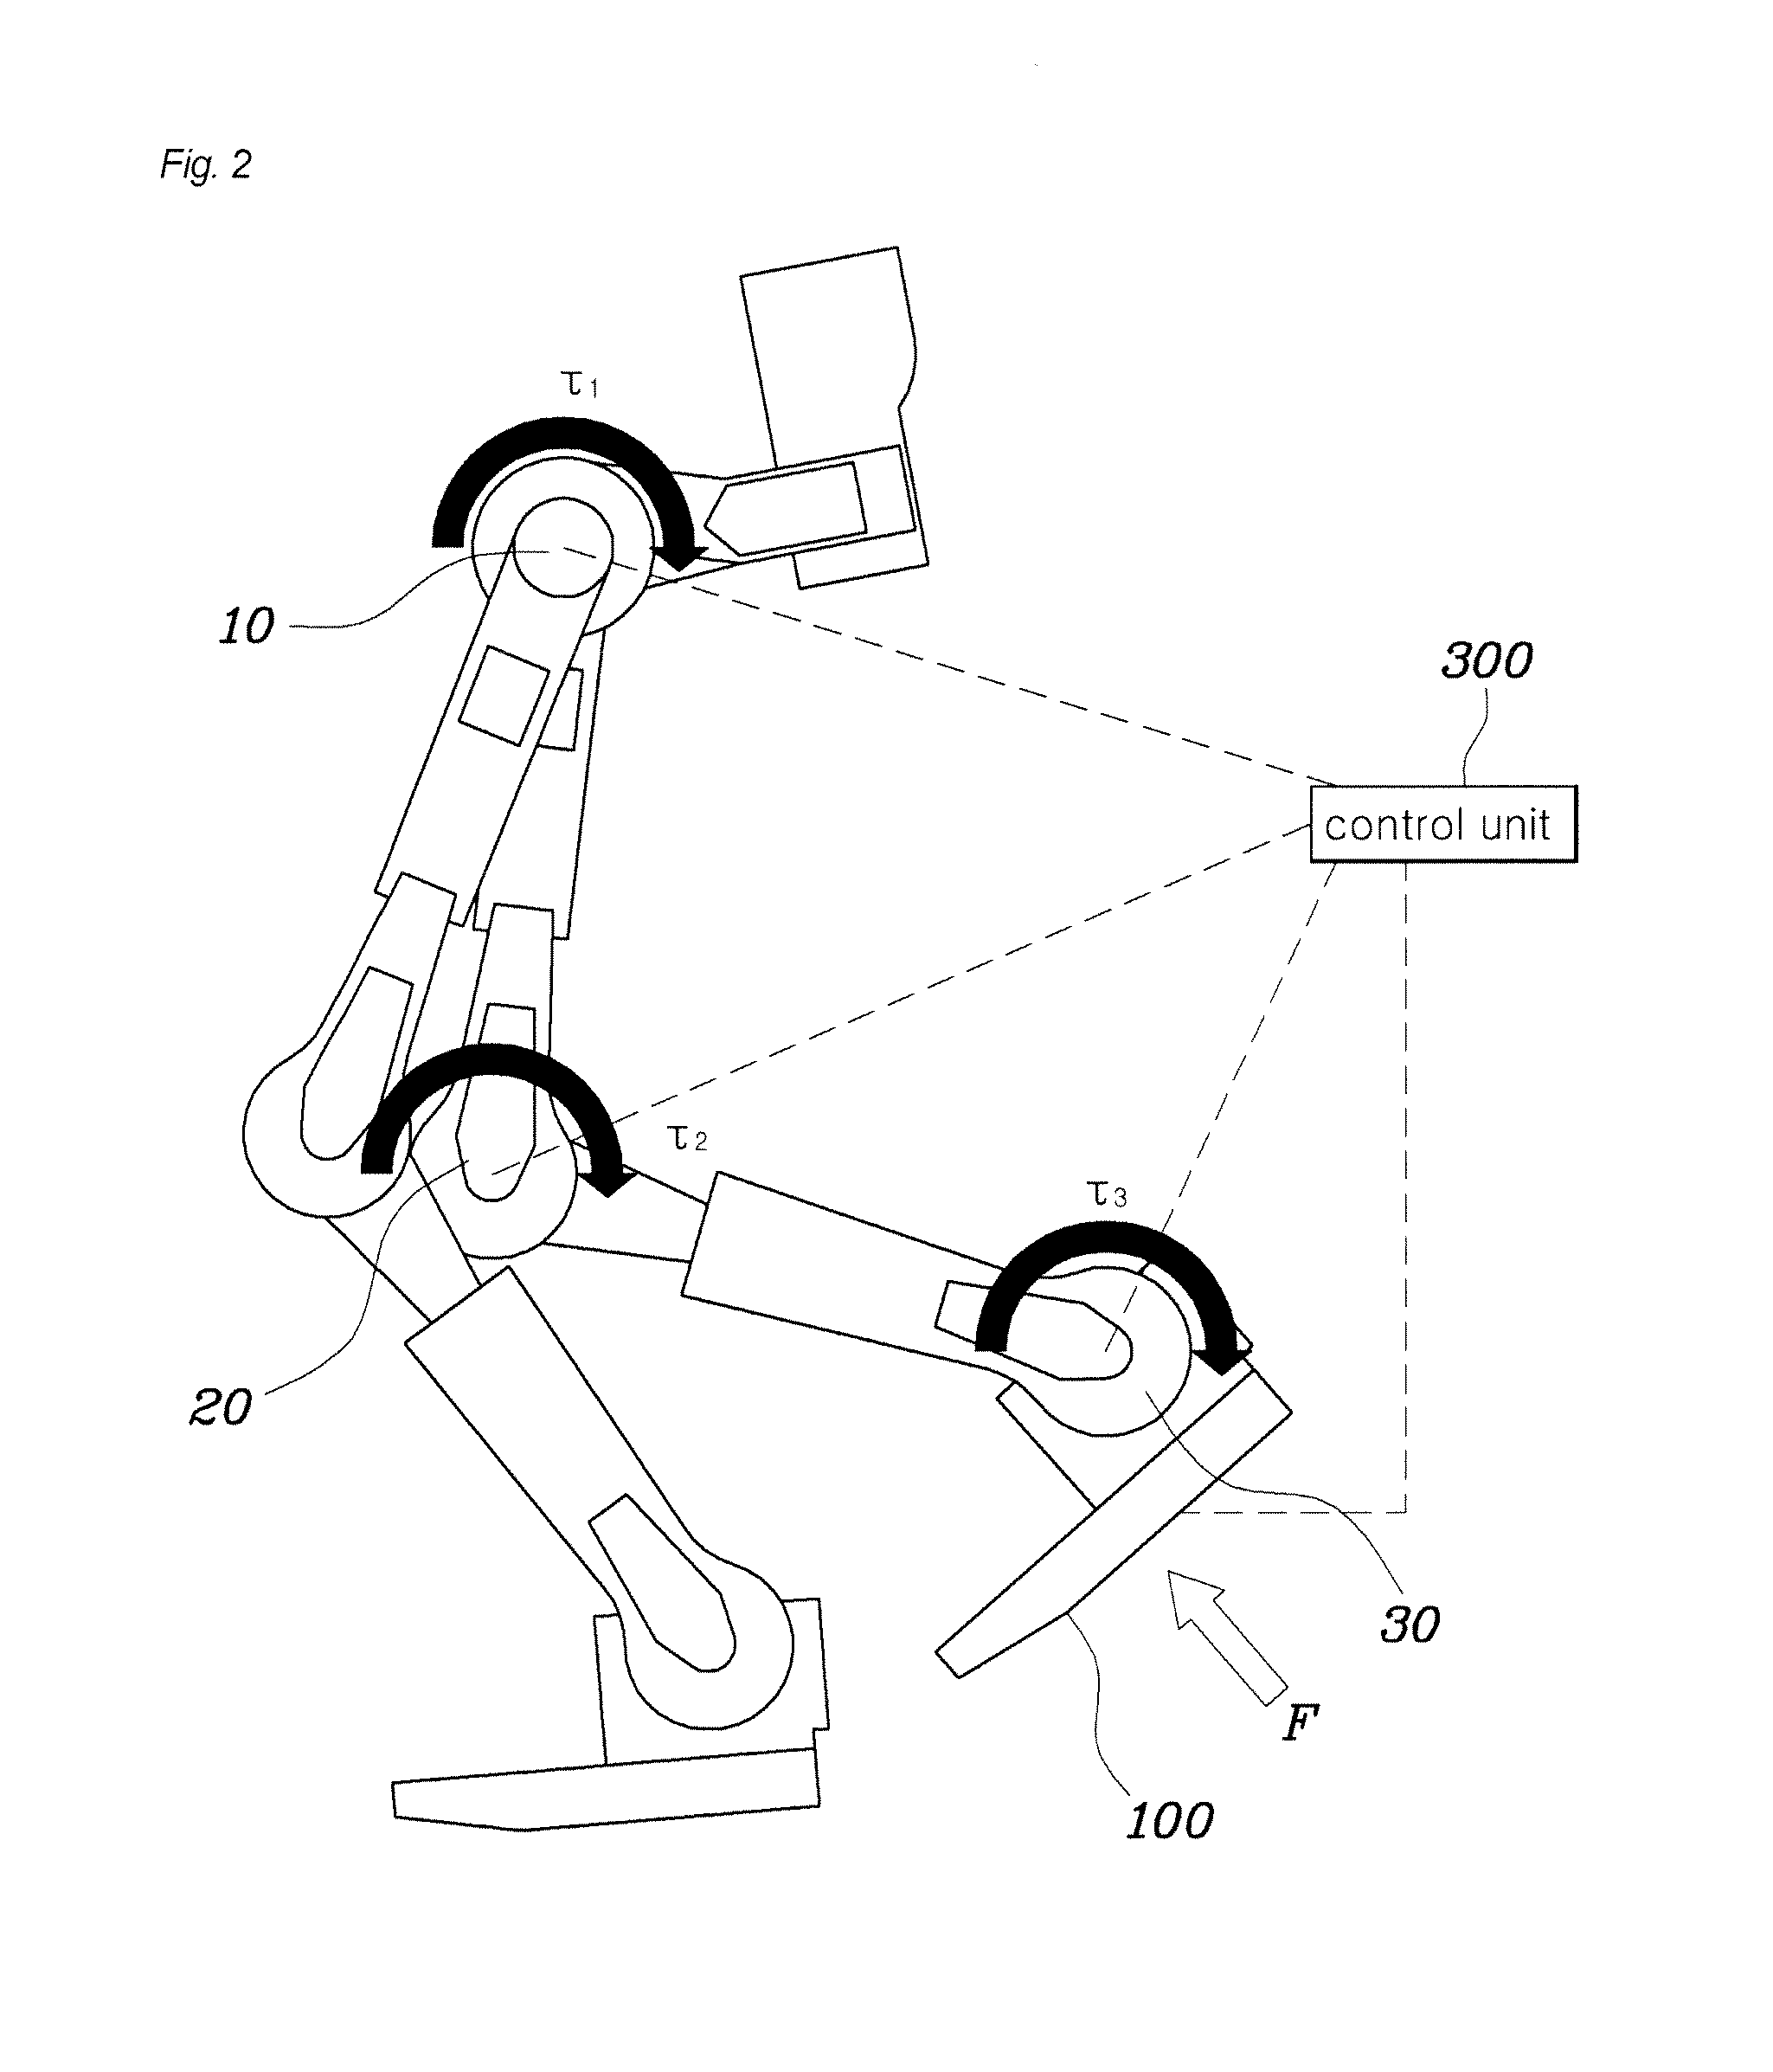 Method and system for controlling gait of robot